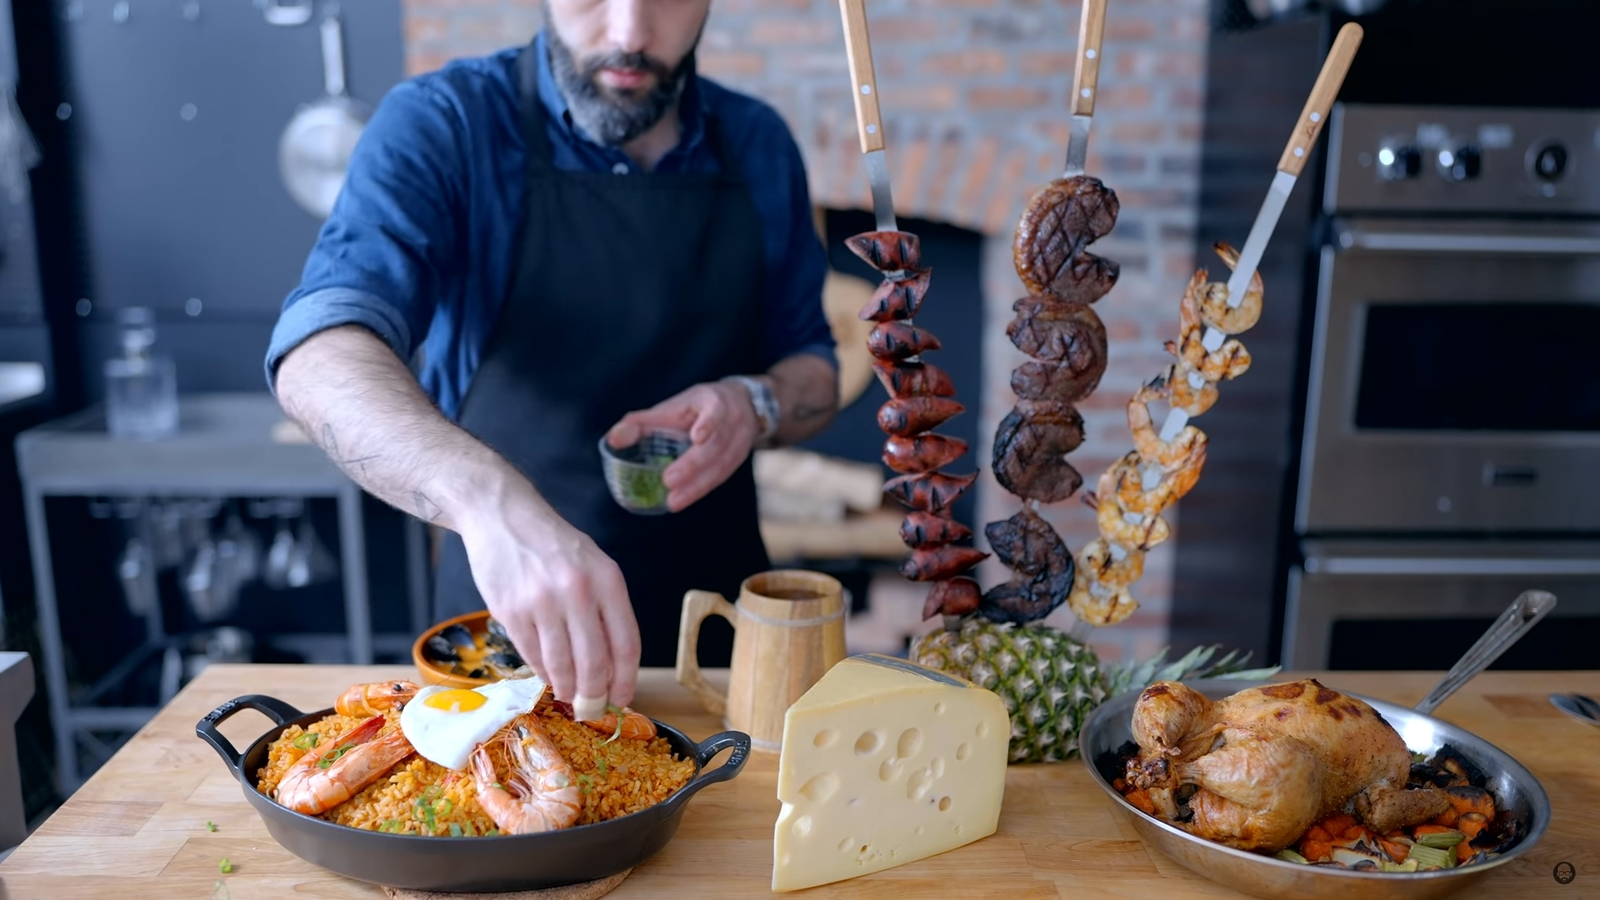 The Chef's Choice Platter inspired by Monster Hunter: World